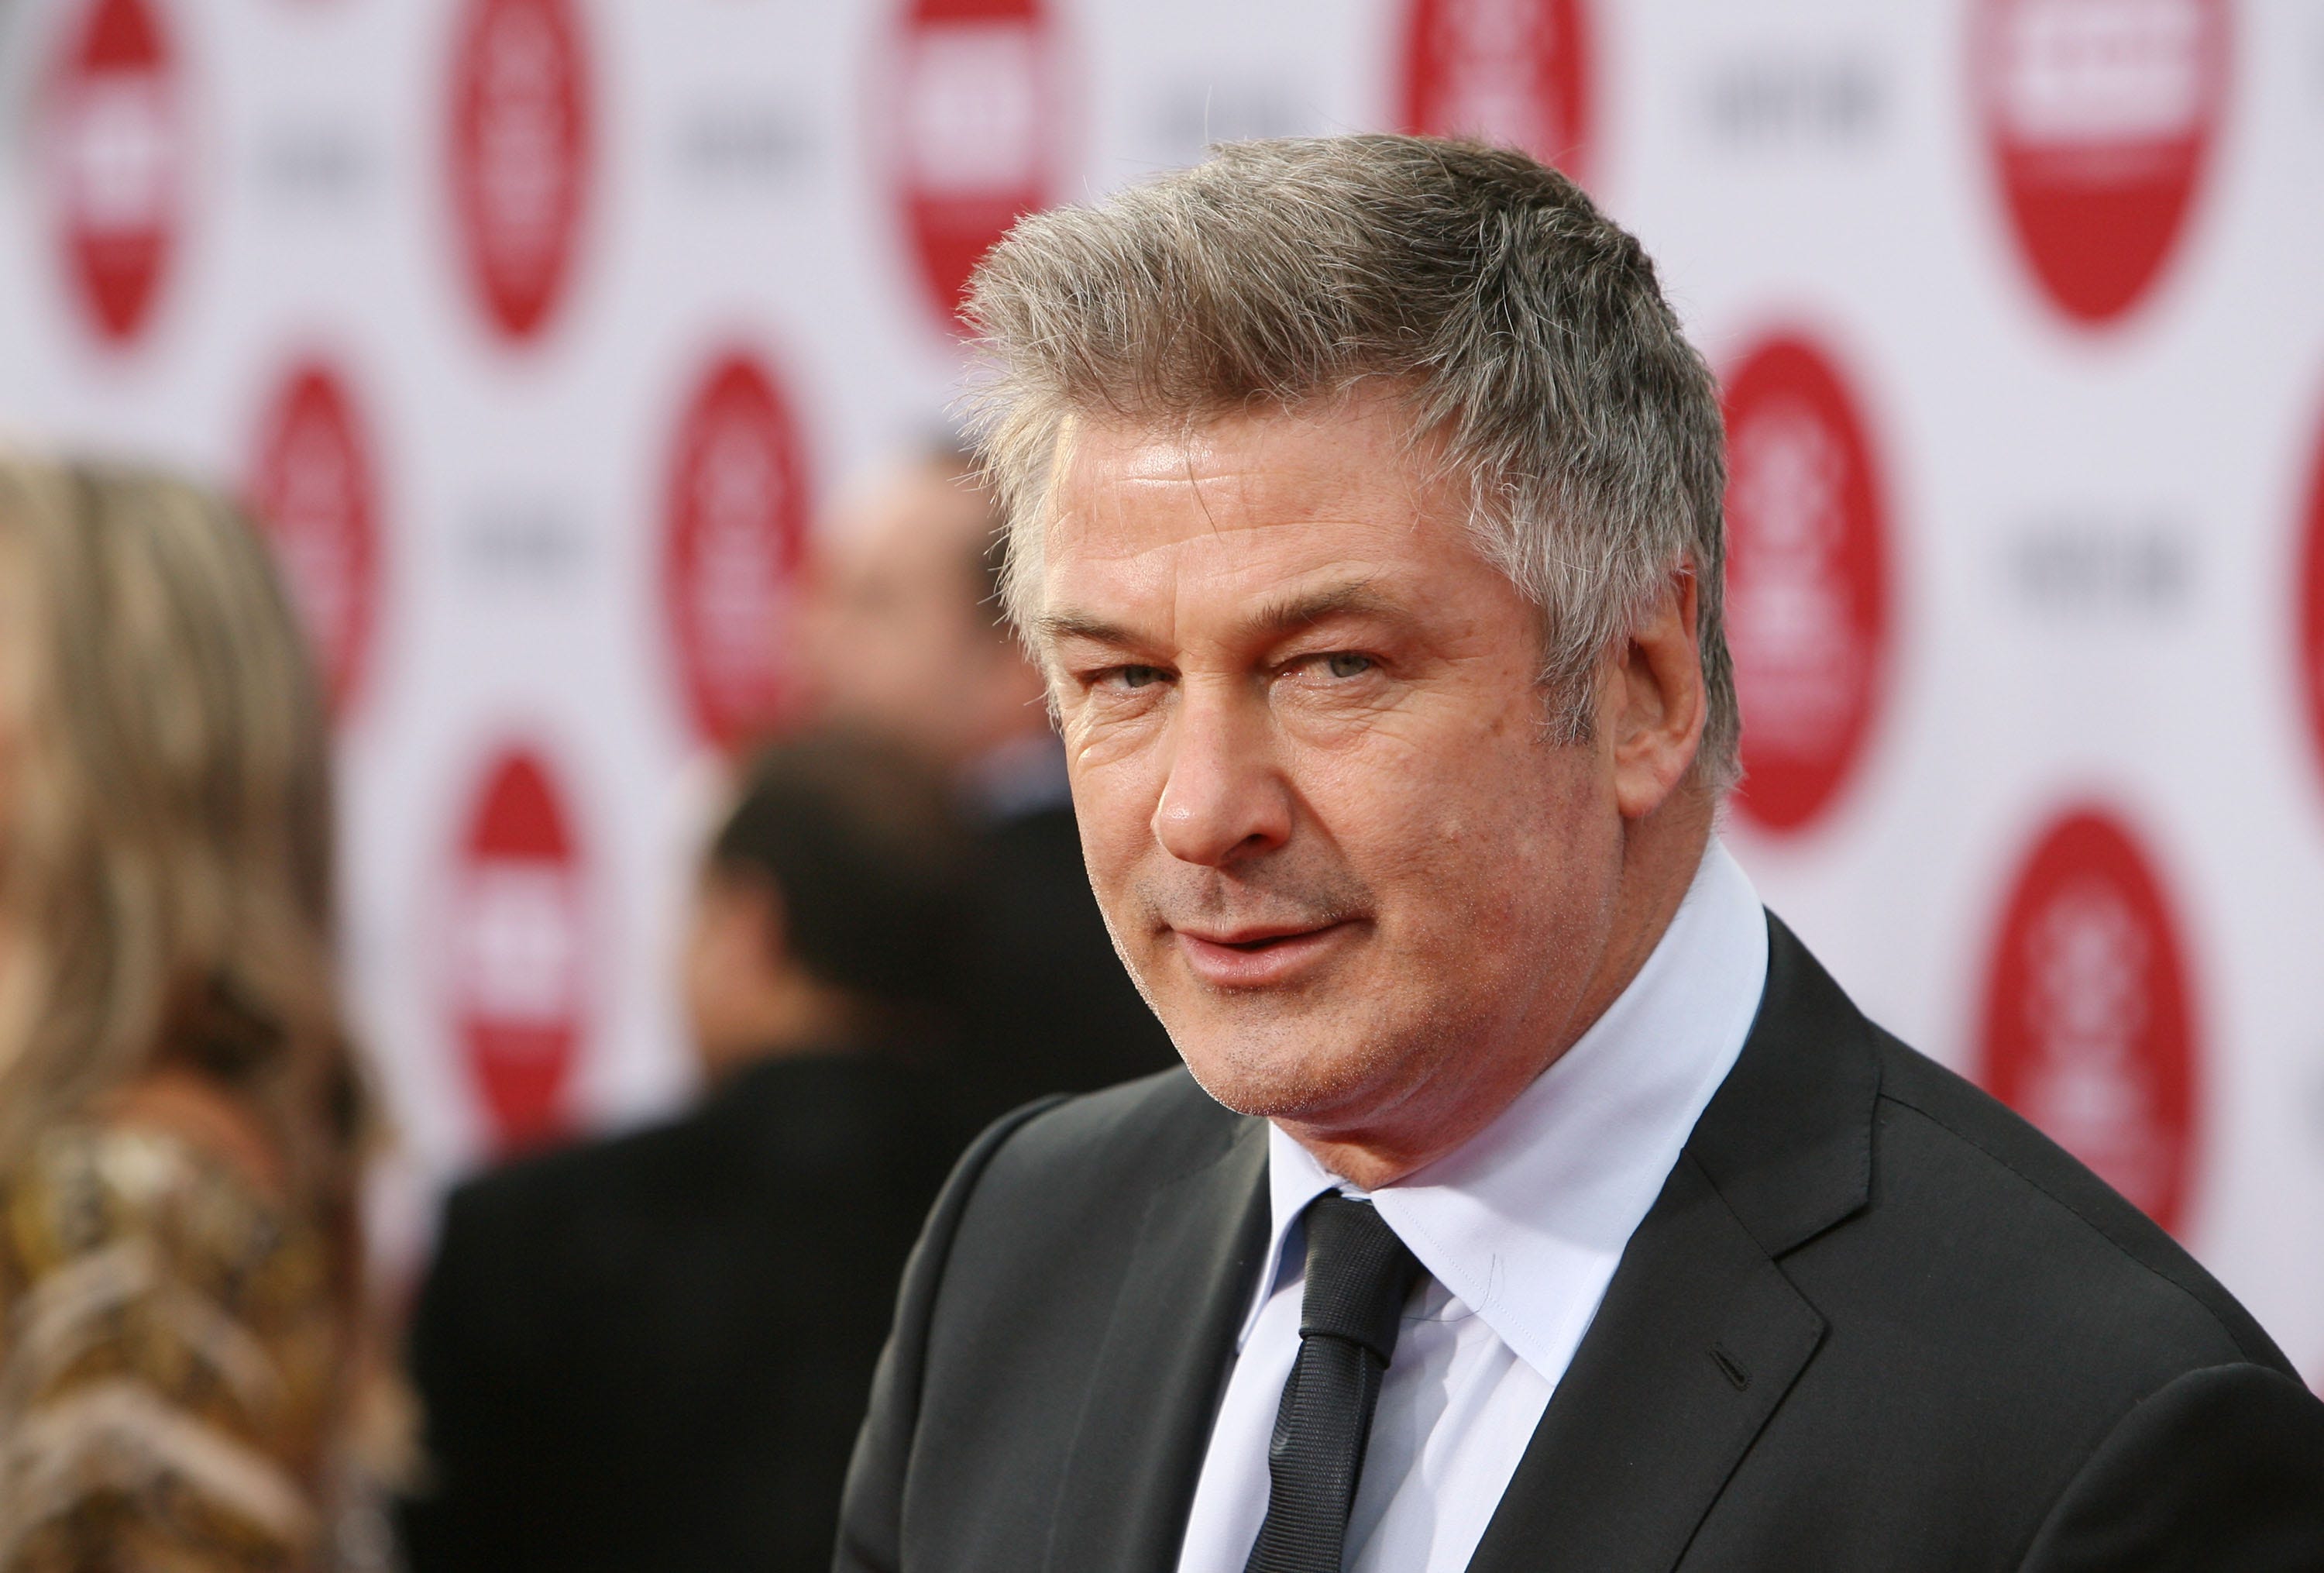 Alec Baldwin suspects ‘politics’ at play in Springsteen DWI incident